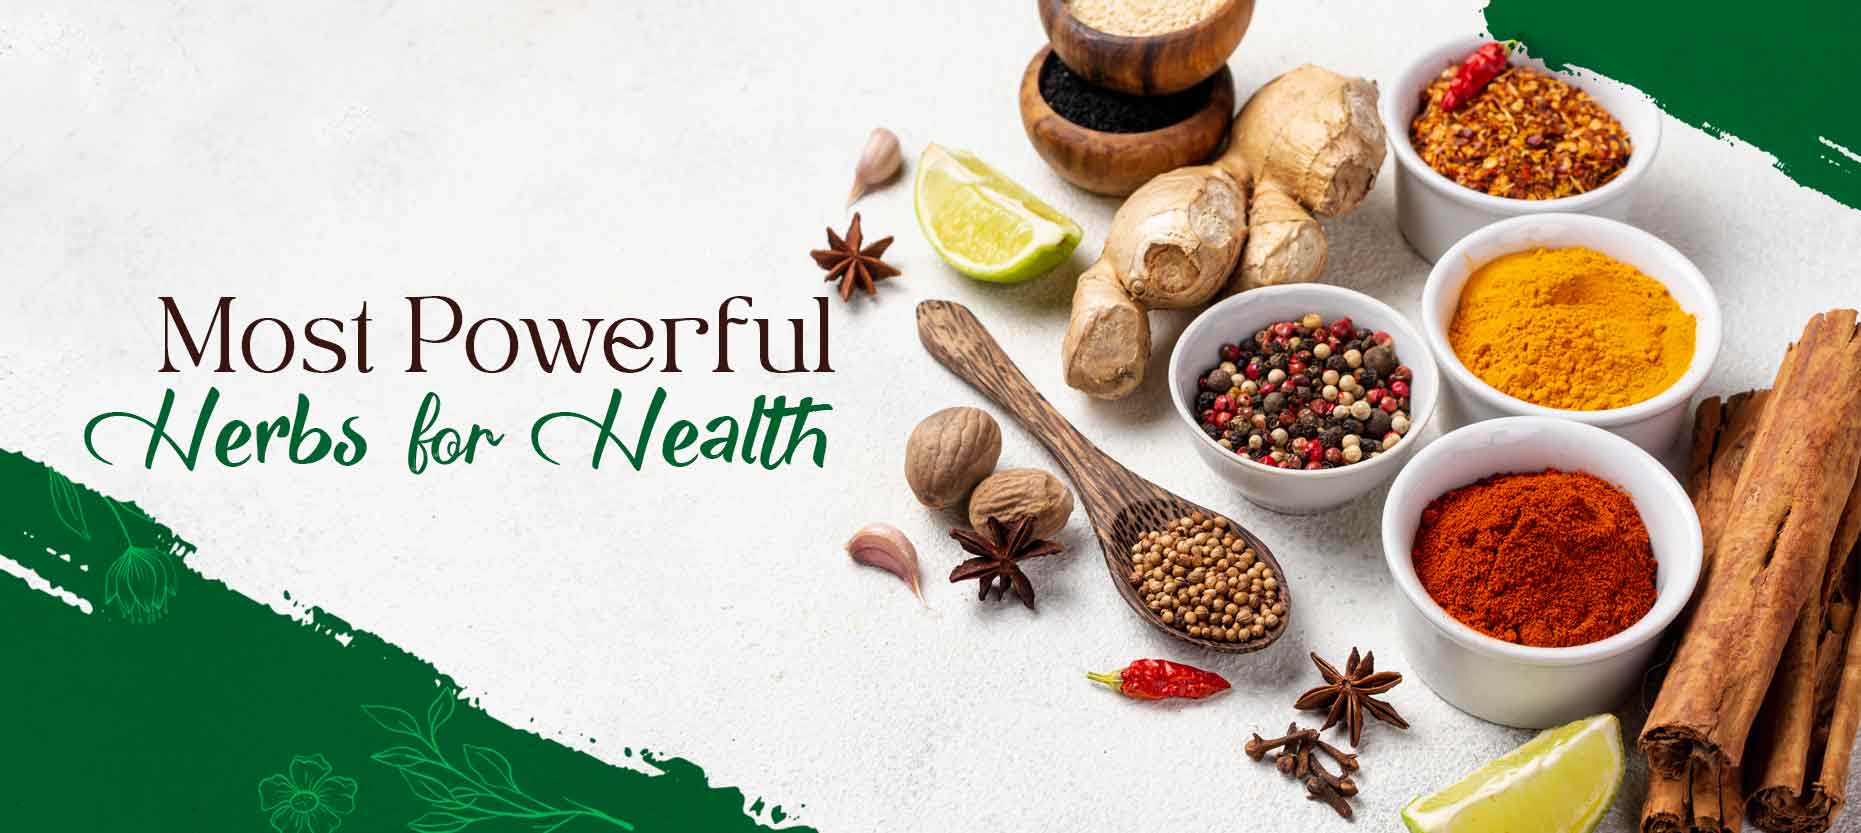 Most Powerful Herbs for Health